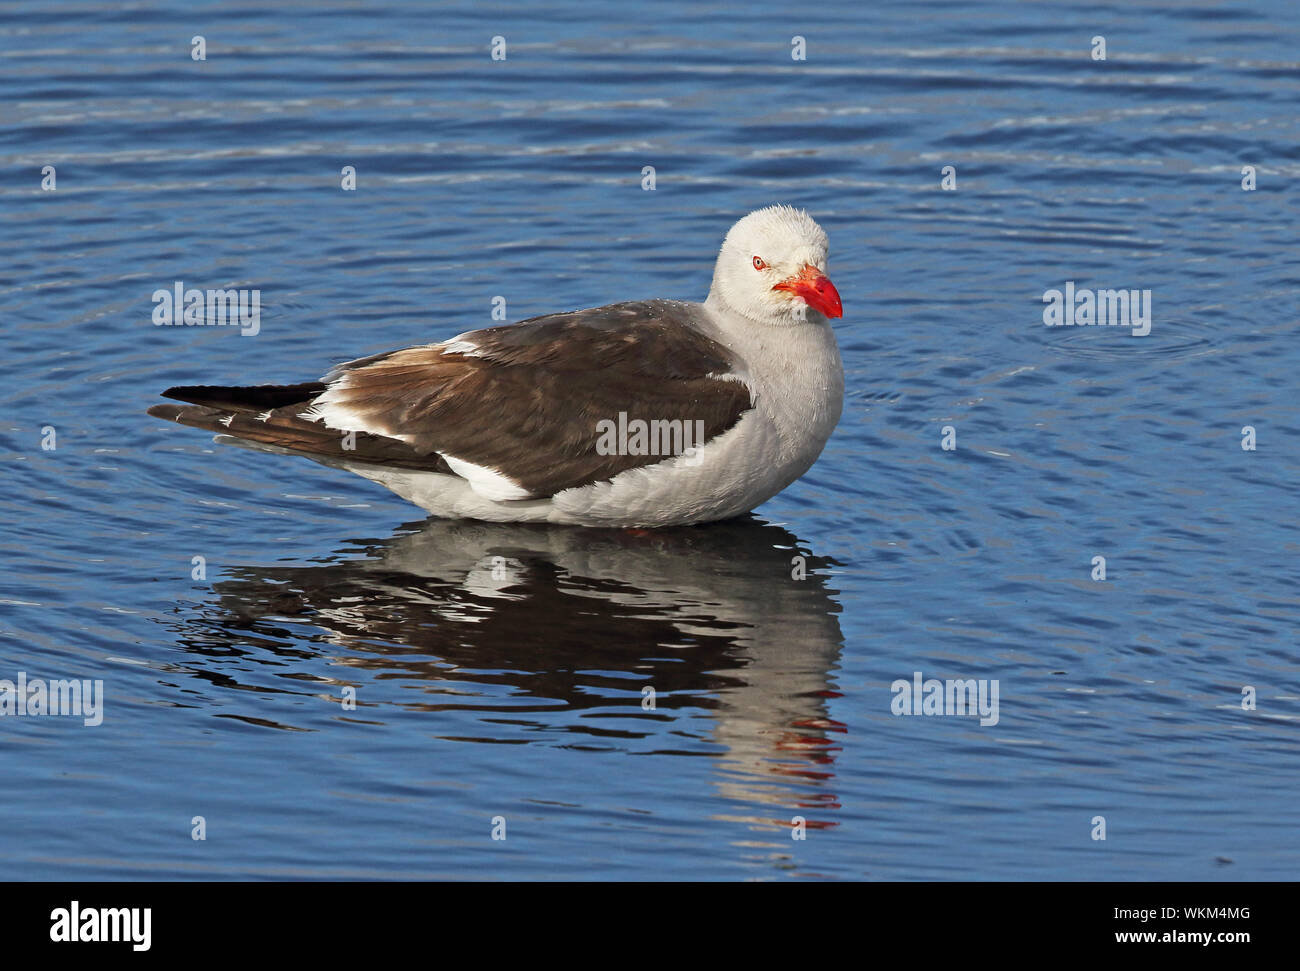 Dolphin Gull (Larus scoresbii) sub-adult standing in shallow water bathing  Tierra del Fuego, Chile            January Stock Photo